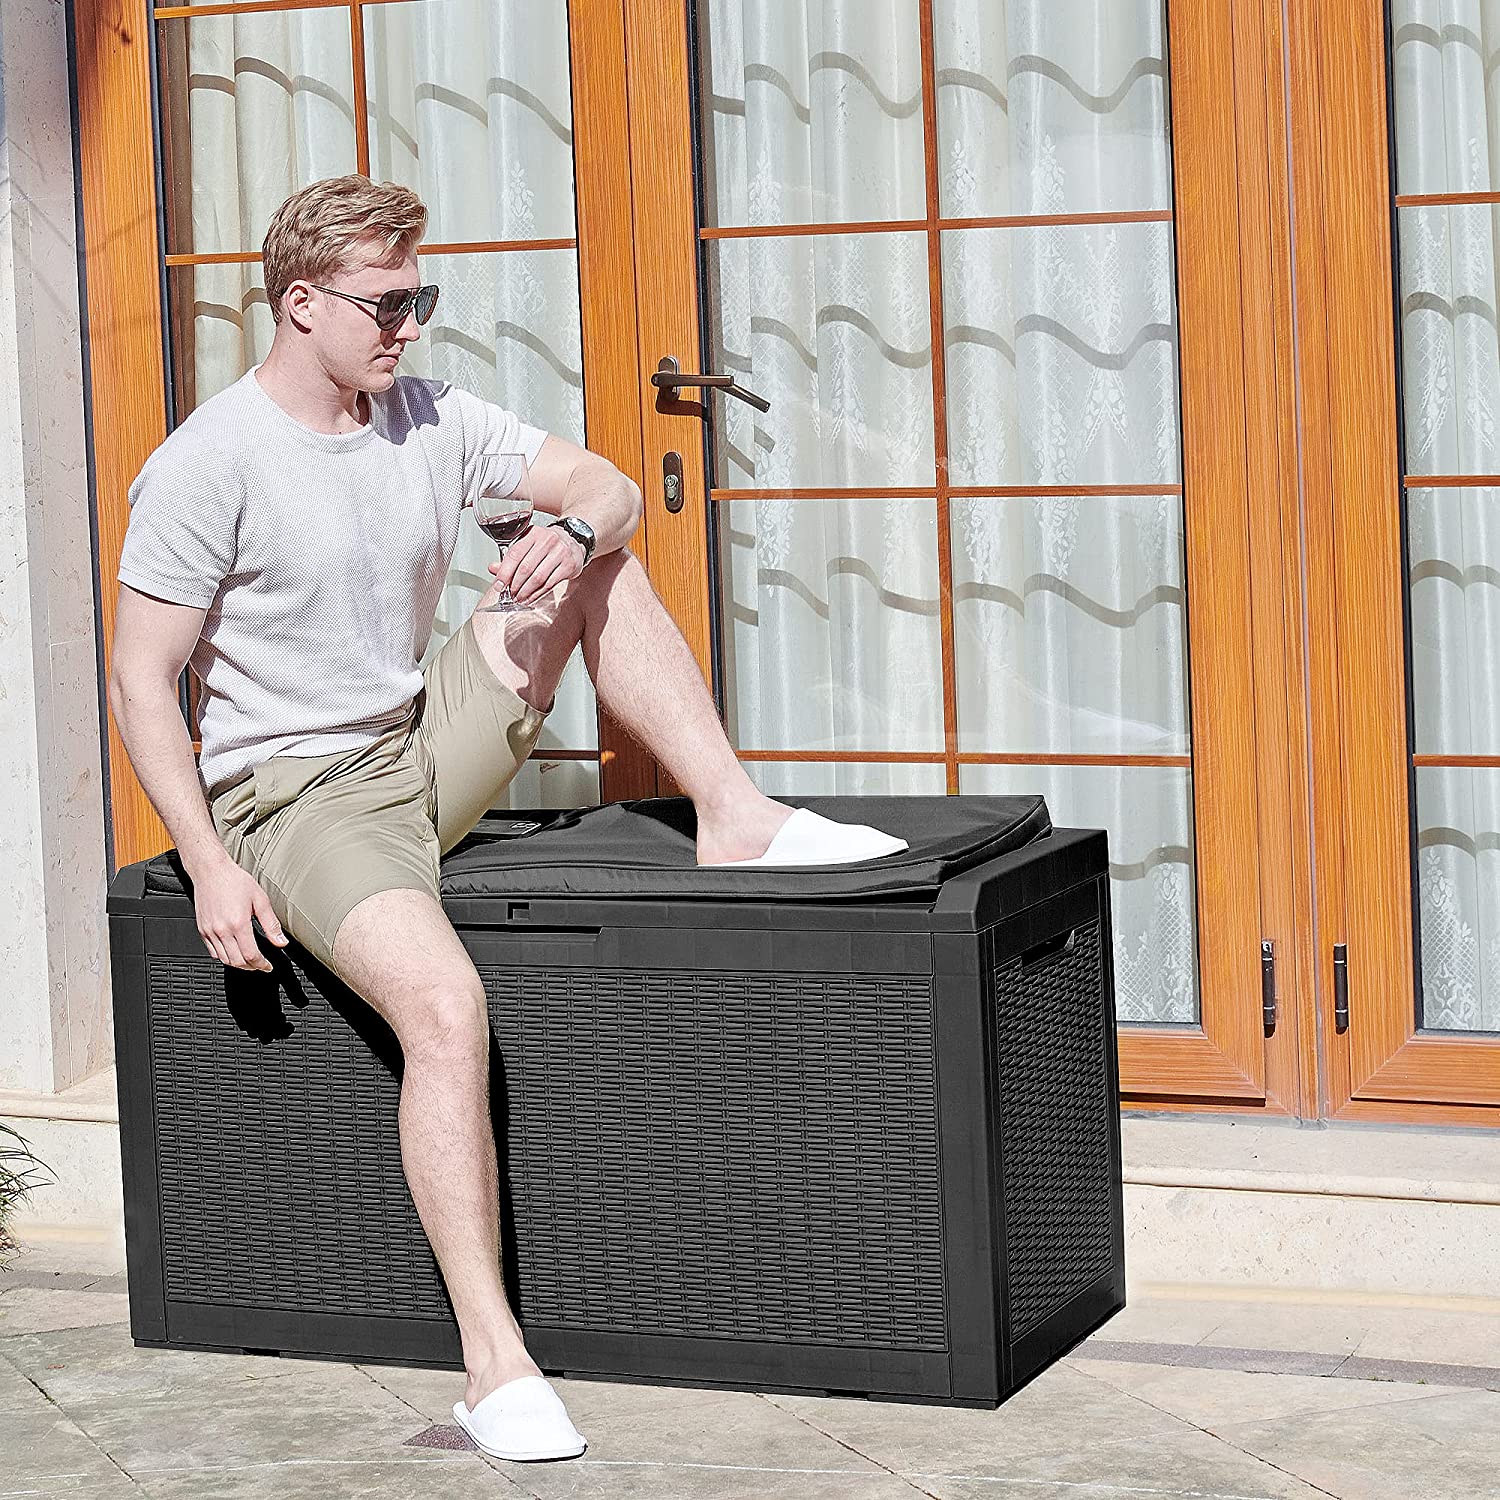 https://bigbigmart.com/wp-content/uploads/2023/05/YITAHOME-100-Gallon-Large-Resin-Deck-Box-Outdoor-Storage-with-Cushion-for-Patio-FurnitureOutdoor-CushionsGarden-and-Pool-Supplies-WaterproofLockable-Black1.jpg